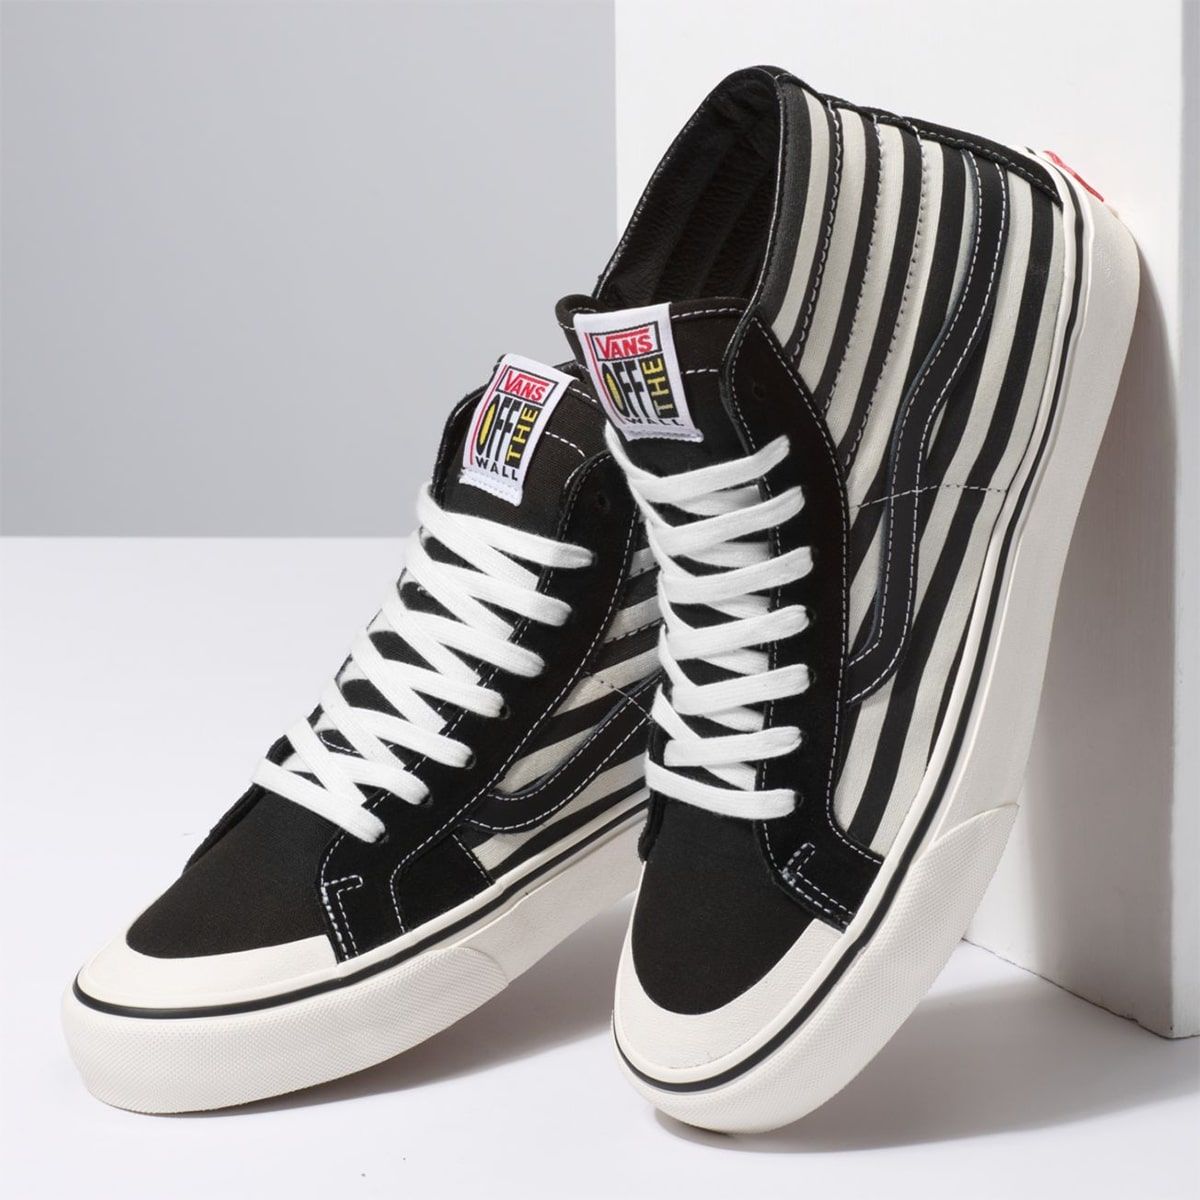 Available Now // Vans Stripe Pack | HOUSE OF HEAT